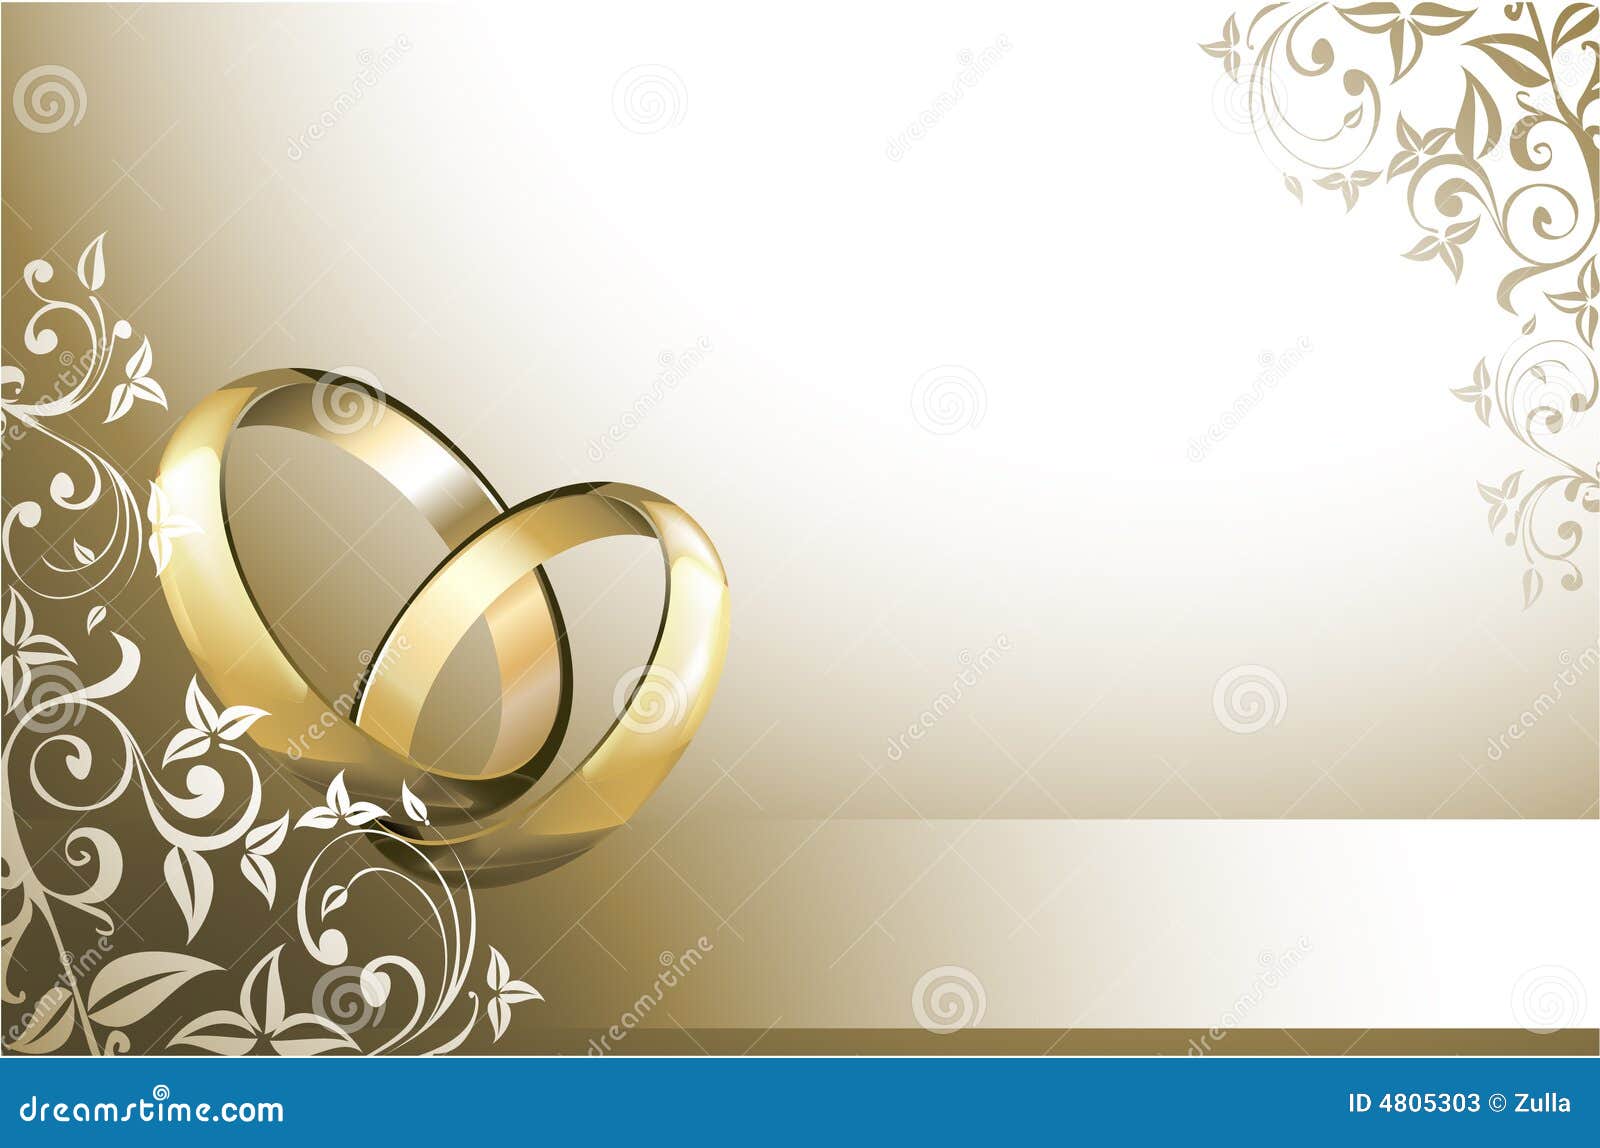 clipart gallery for wedding card - photo #7